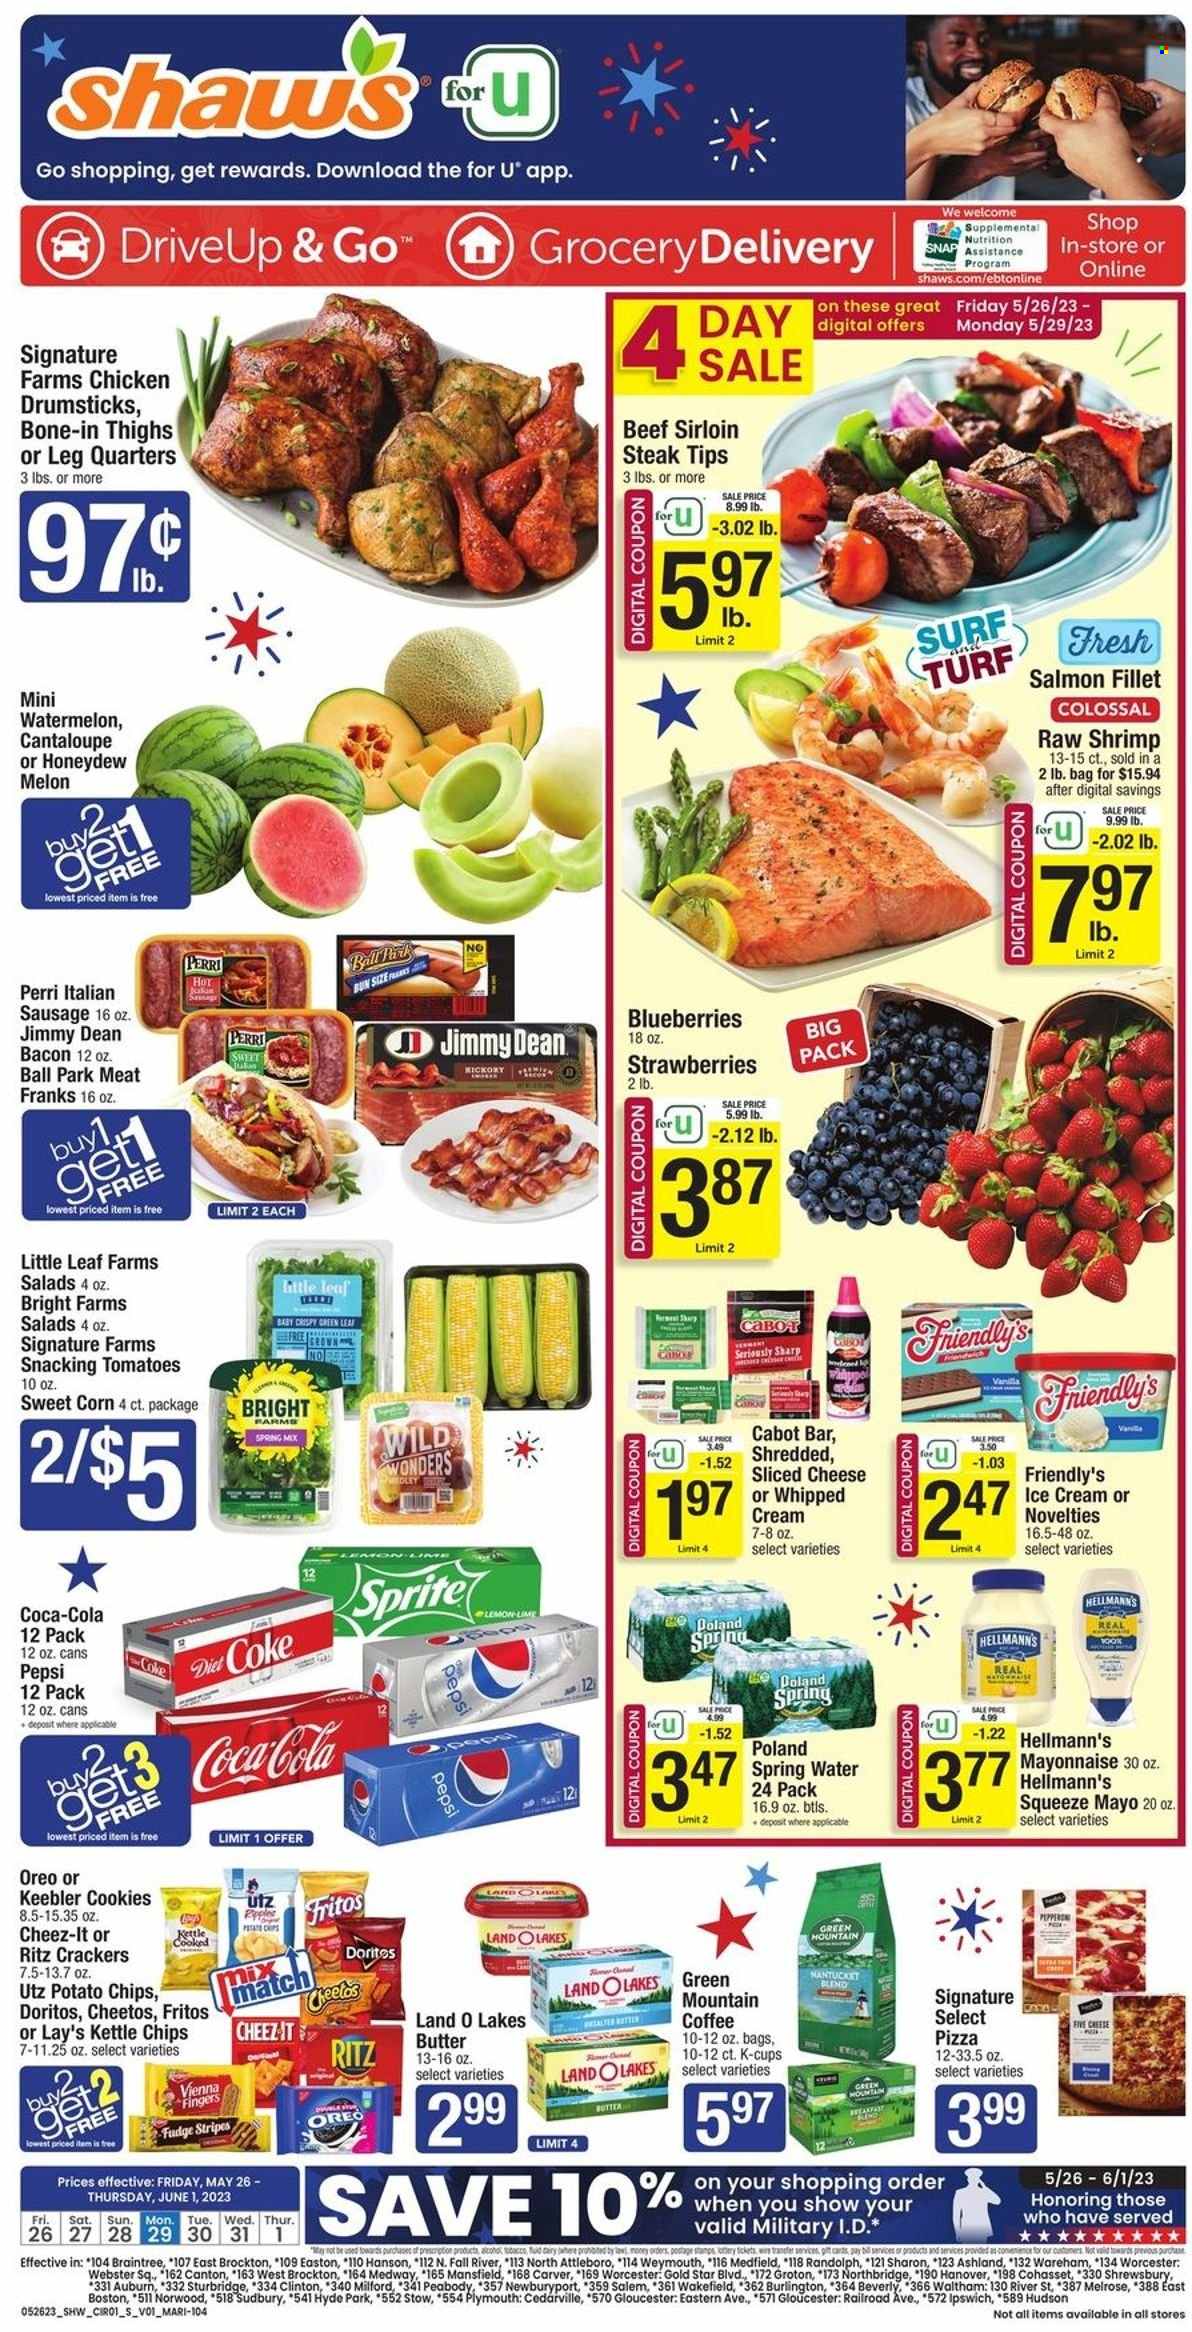 thumbnail - Shaw’s Flyer - 05/26/2023 - 06/01/2023 - Sales products - cantaloupe, corn, salad greens, salad, sweet corn, blueberries, strawberries, melons, fish fillets, salmon, salmon fillet, shrimps, Jimmy Dean, italian sausage, frankfurters, sliced cheese, whipped cream, mayonnaise, Hellmann’s, ice cream, ice cream bars, Friendly's Ice Cream, fudge, crackers, Keebler, RITZ, Doritos, Fritos, potato chips, Cheetos, chips, Lay’s, Cheez-It, Kettle chips, Coca-Cola, Sprite, Pepsi, Diet Coke, soft drink, Coke, spring water, carbonated soft drink, coffee capsules, K-Cups, Green Mountain, alcohol, chicken drumsticks, beef meat, beef sirloin, steak, sirloin steak, Surf, Sharp. Page 1.